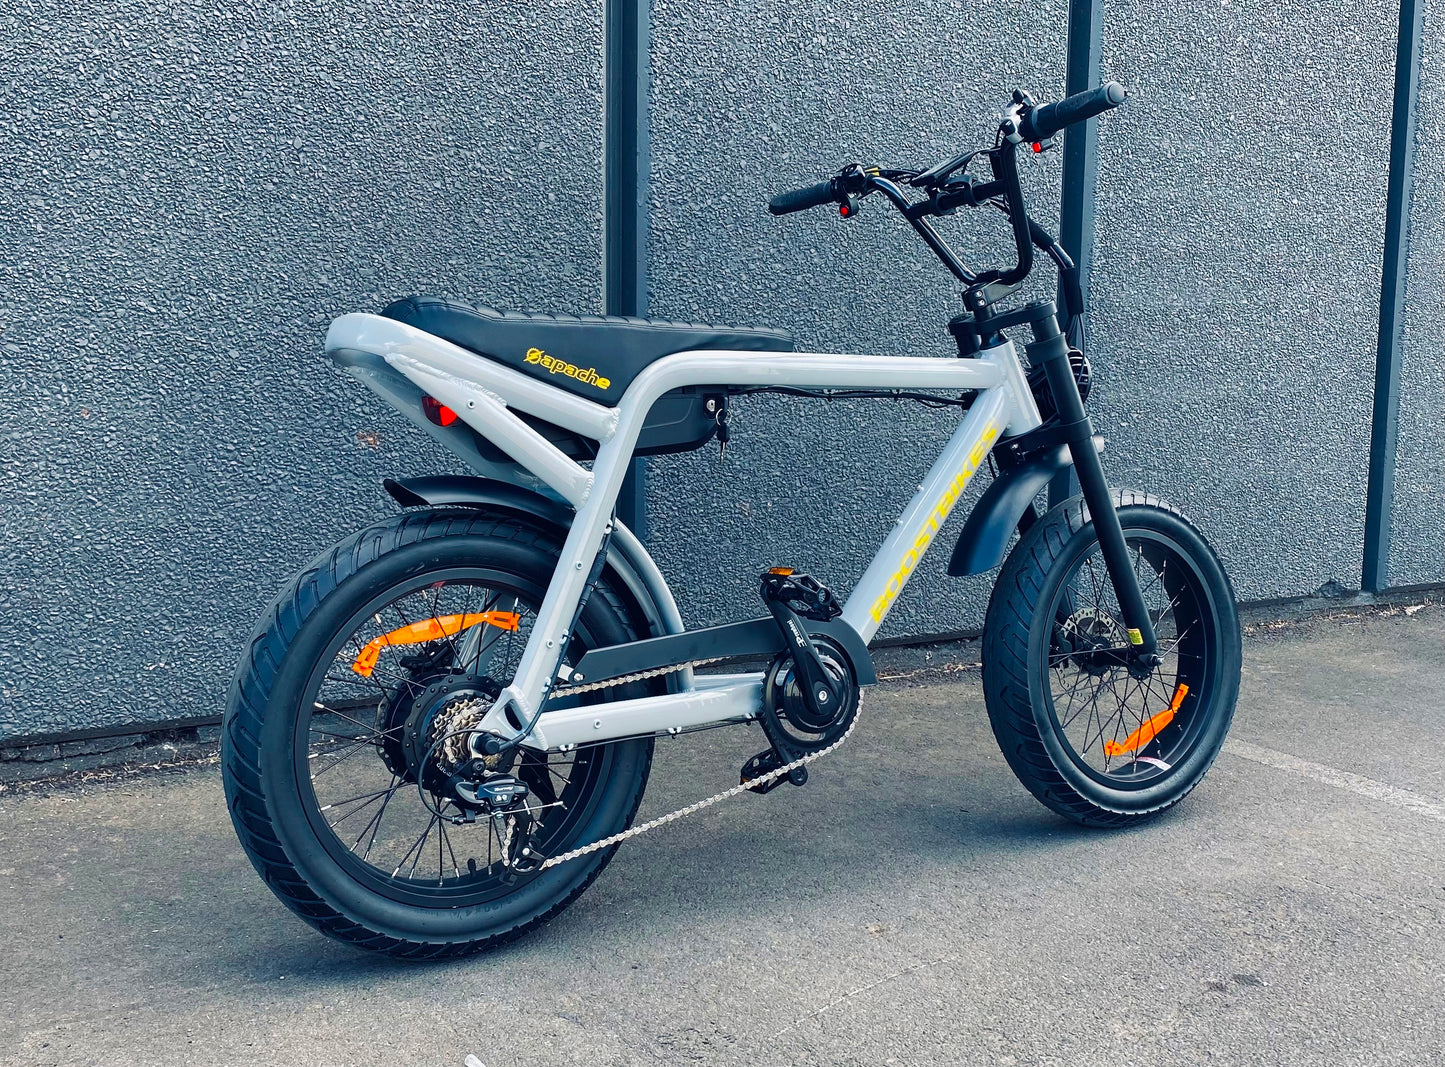 Apache, Modern yet retro 20" fat tyre ebike with performance and packed with features in true SUPER 73 style from Boostbikes.